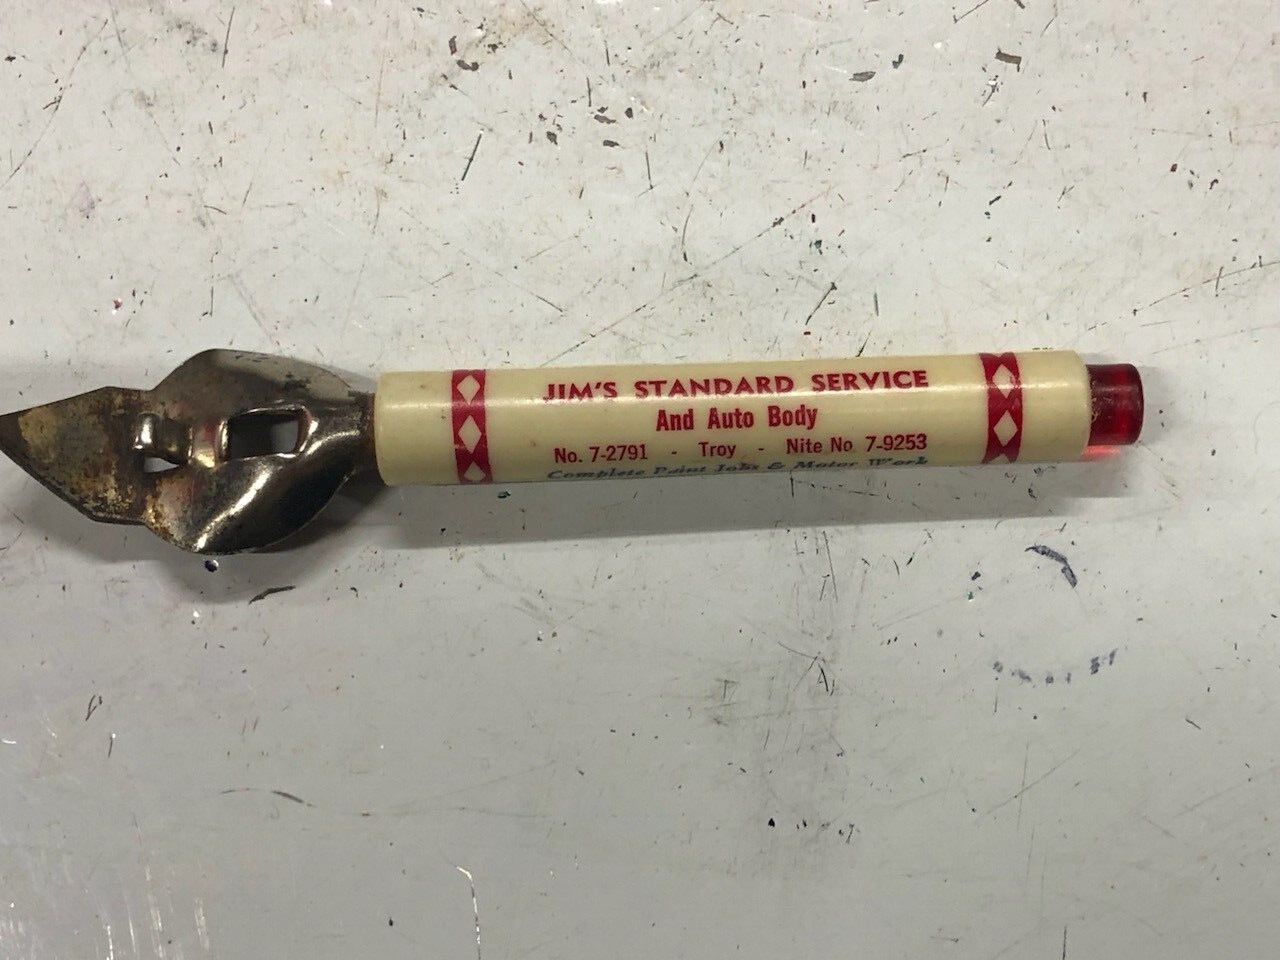 Vintage JIM\'S STANDARD SERVICE & AUTO BODY Advertising Bottle Oil Can Opener GAS